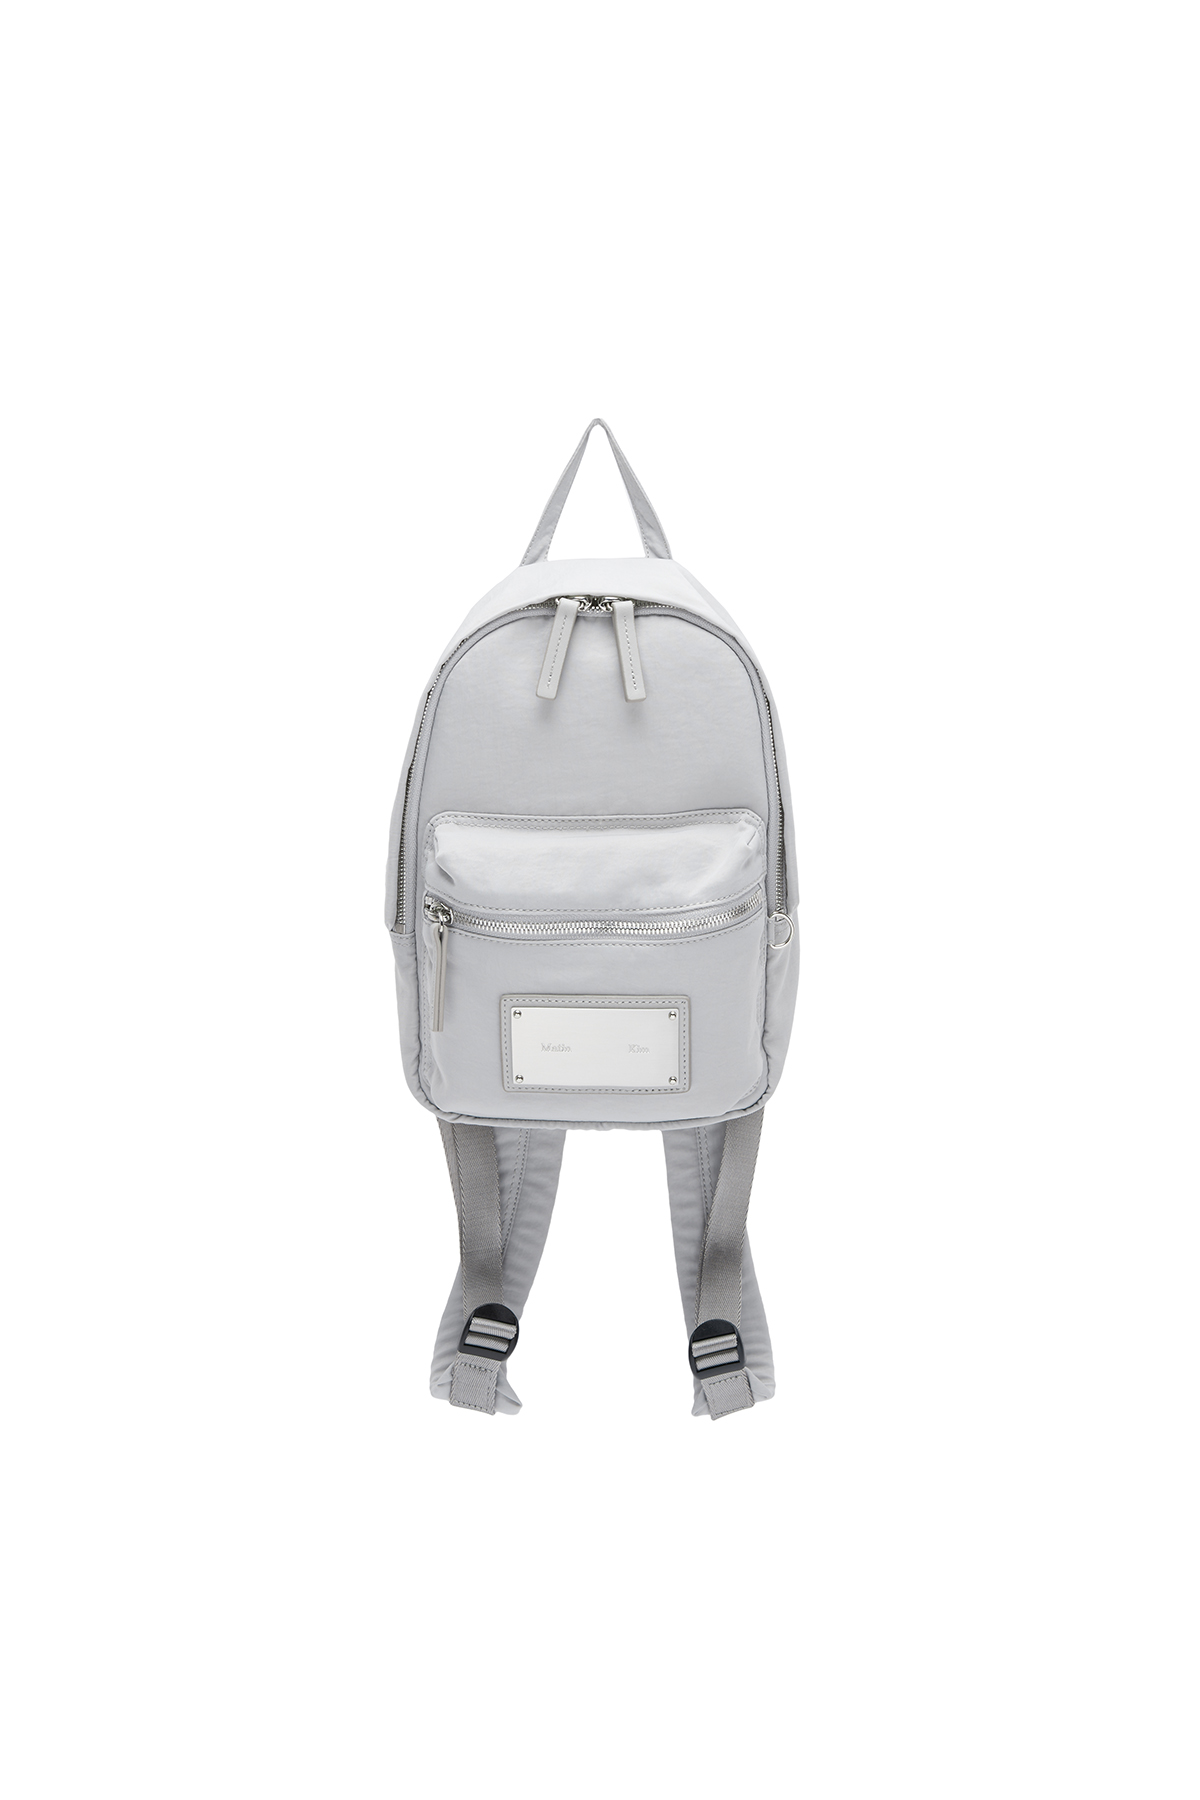 BABY CARGO ALLDAY BACK PACK IN LIGHT GREY